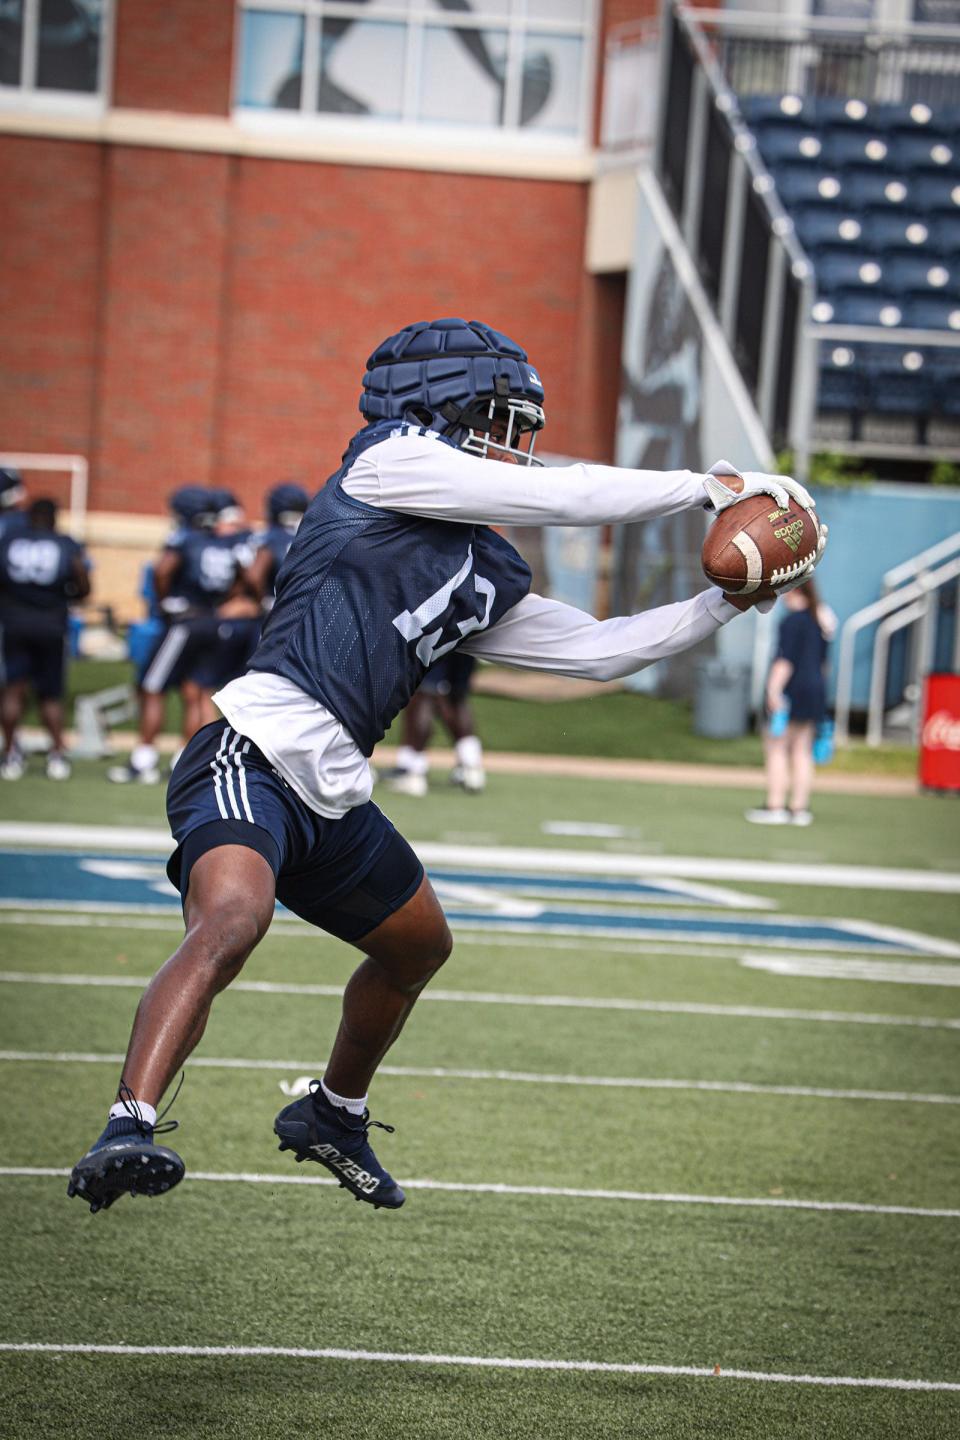 Georgia Southern defensive back Derrick Canteen catches a ball during the first fall practice at Paulson Stadium in Statesboro.